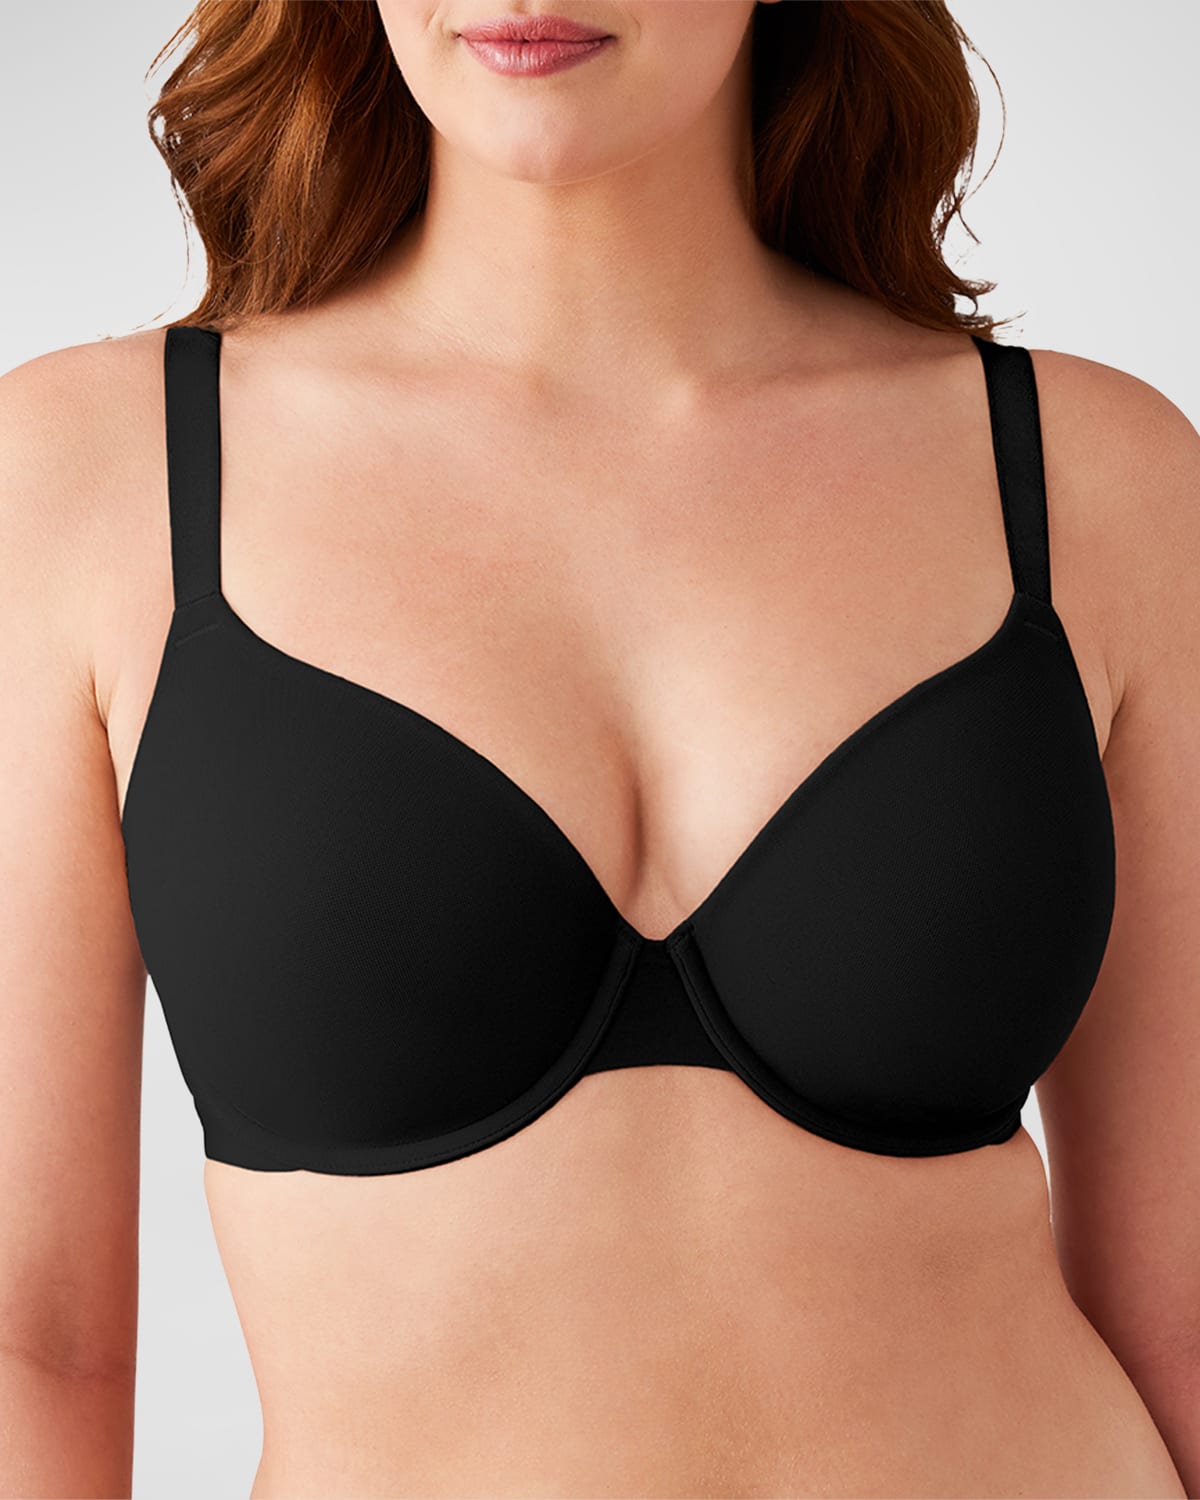 Wacoal Women's Ultimate Side Smoother Contour Bra, Black, 32DDD